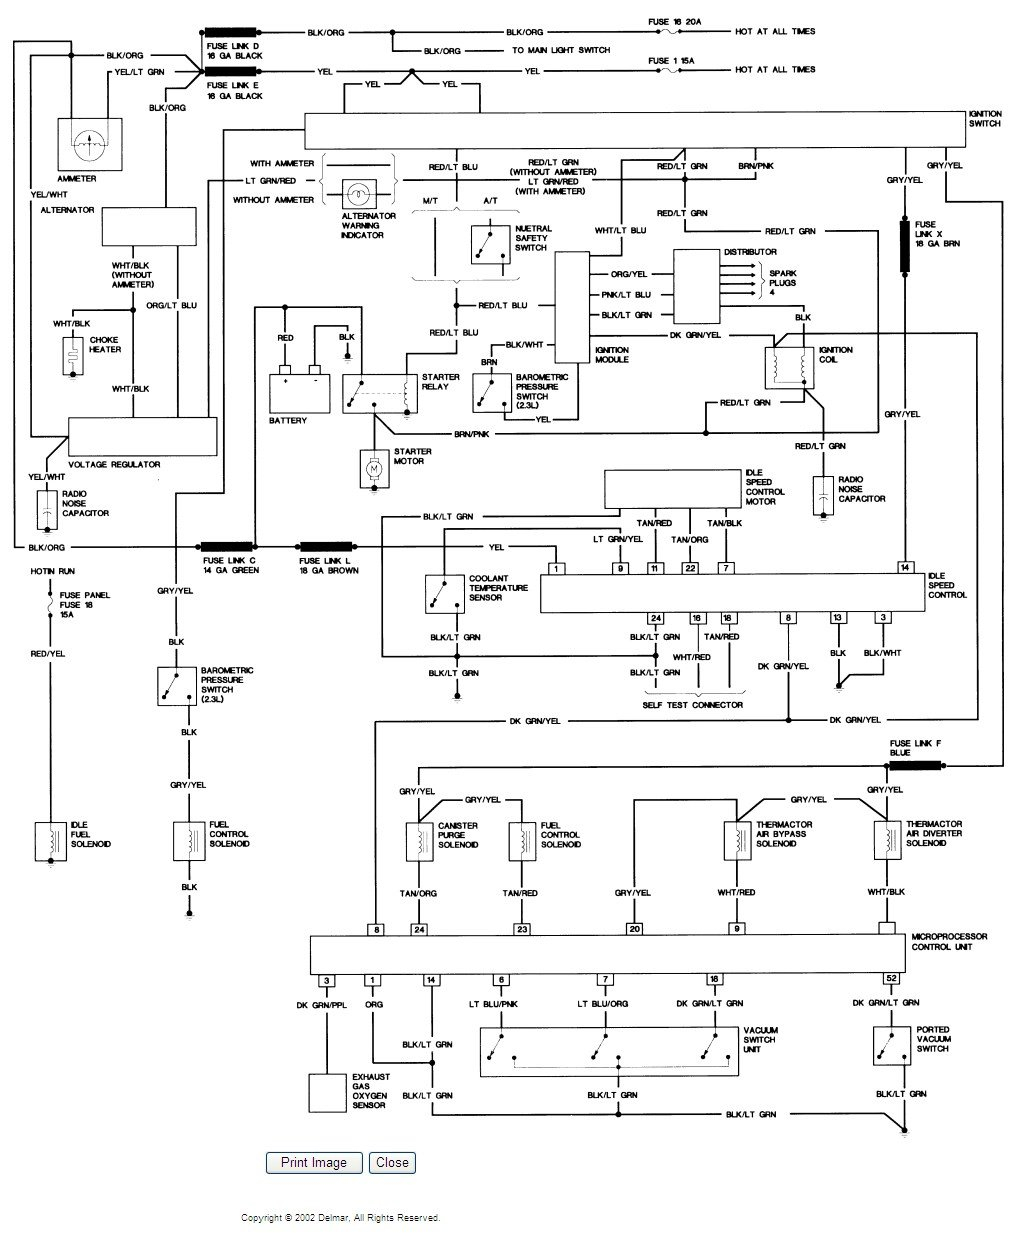 I Need The Electrical Wiring Diagram For A 1985 Ford Ranger I Am Not